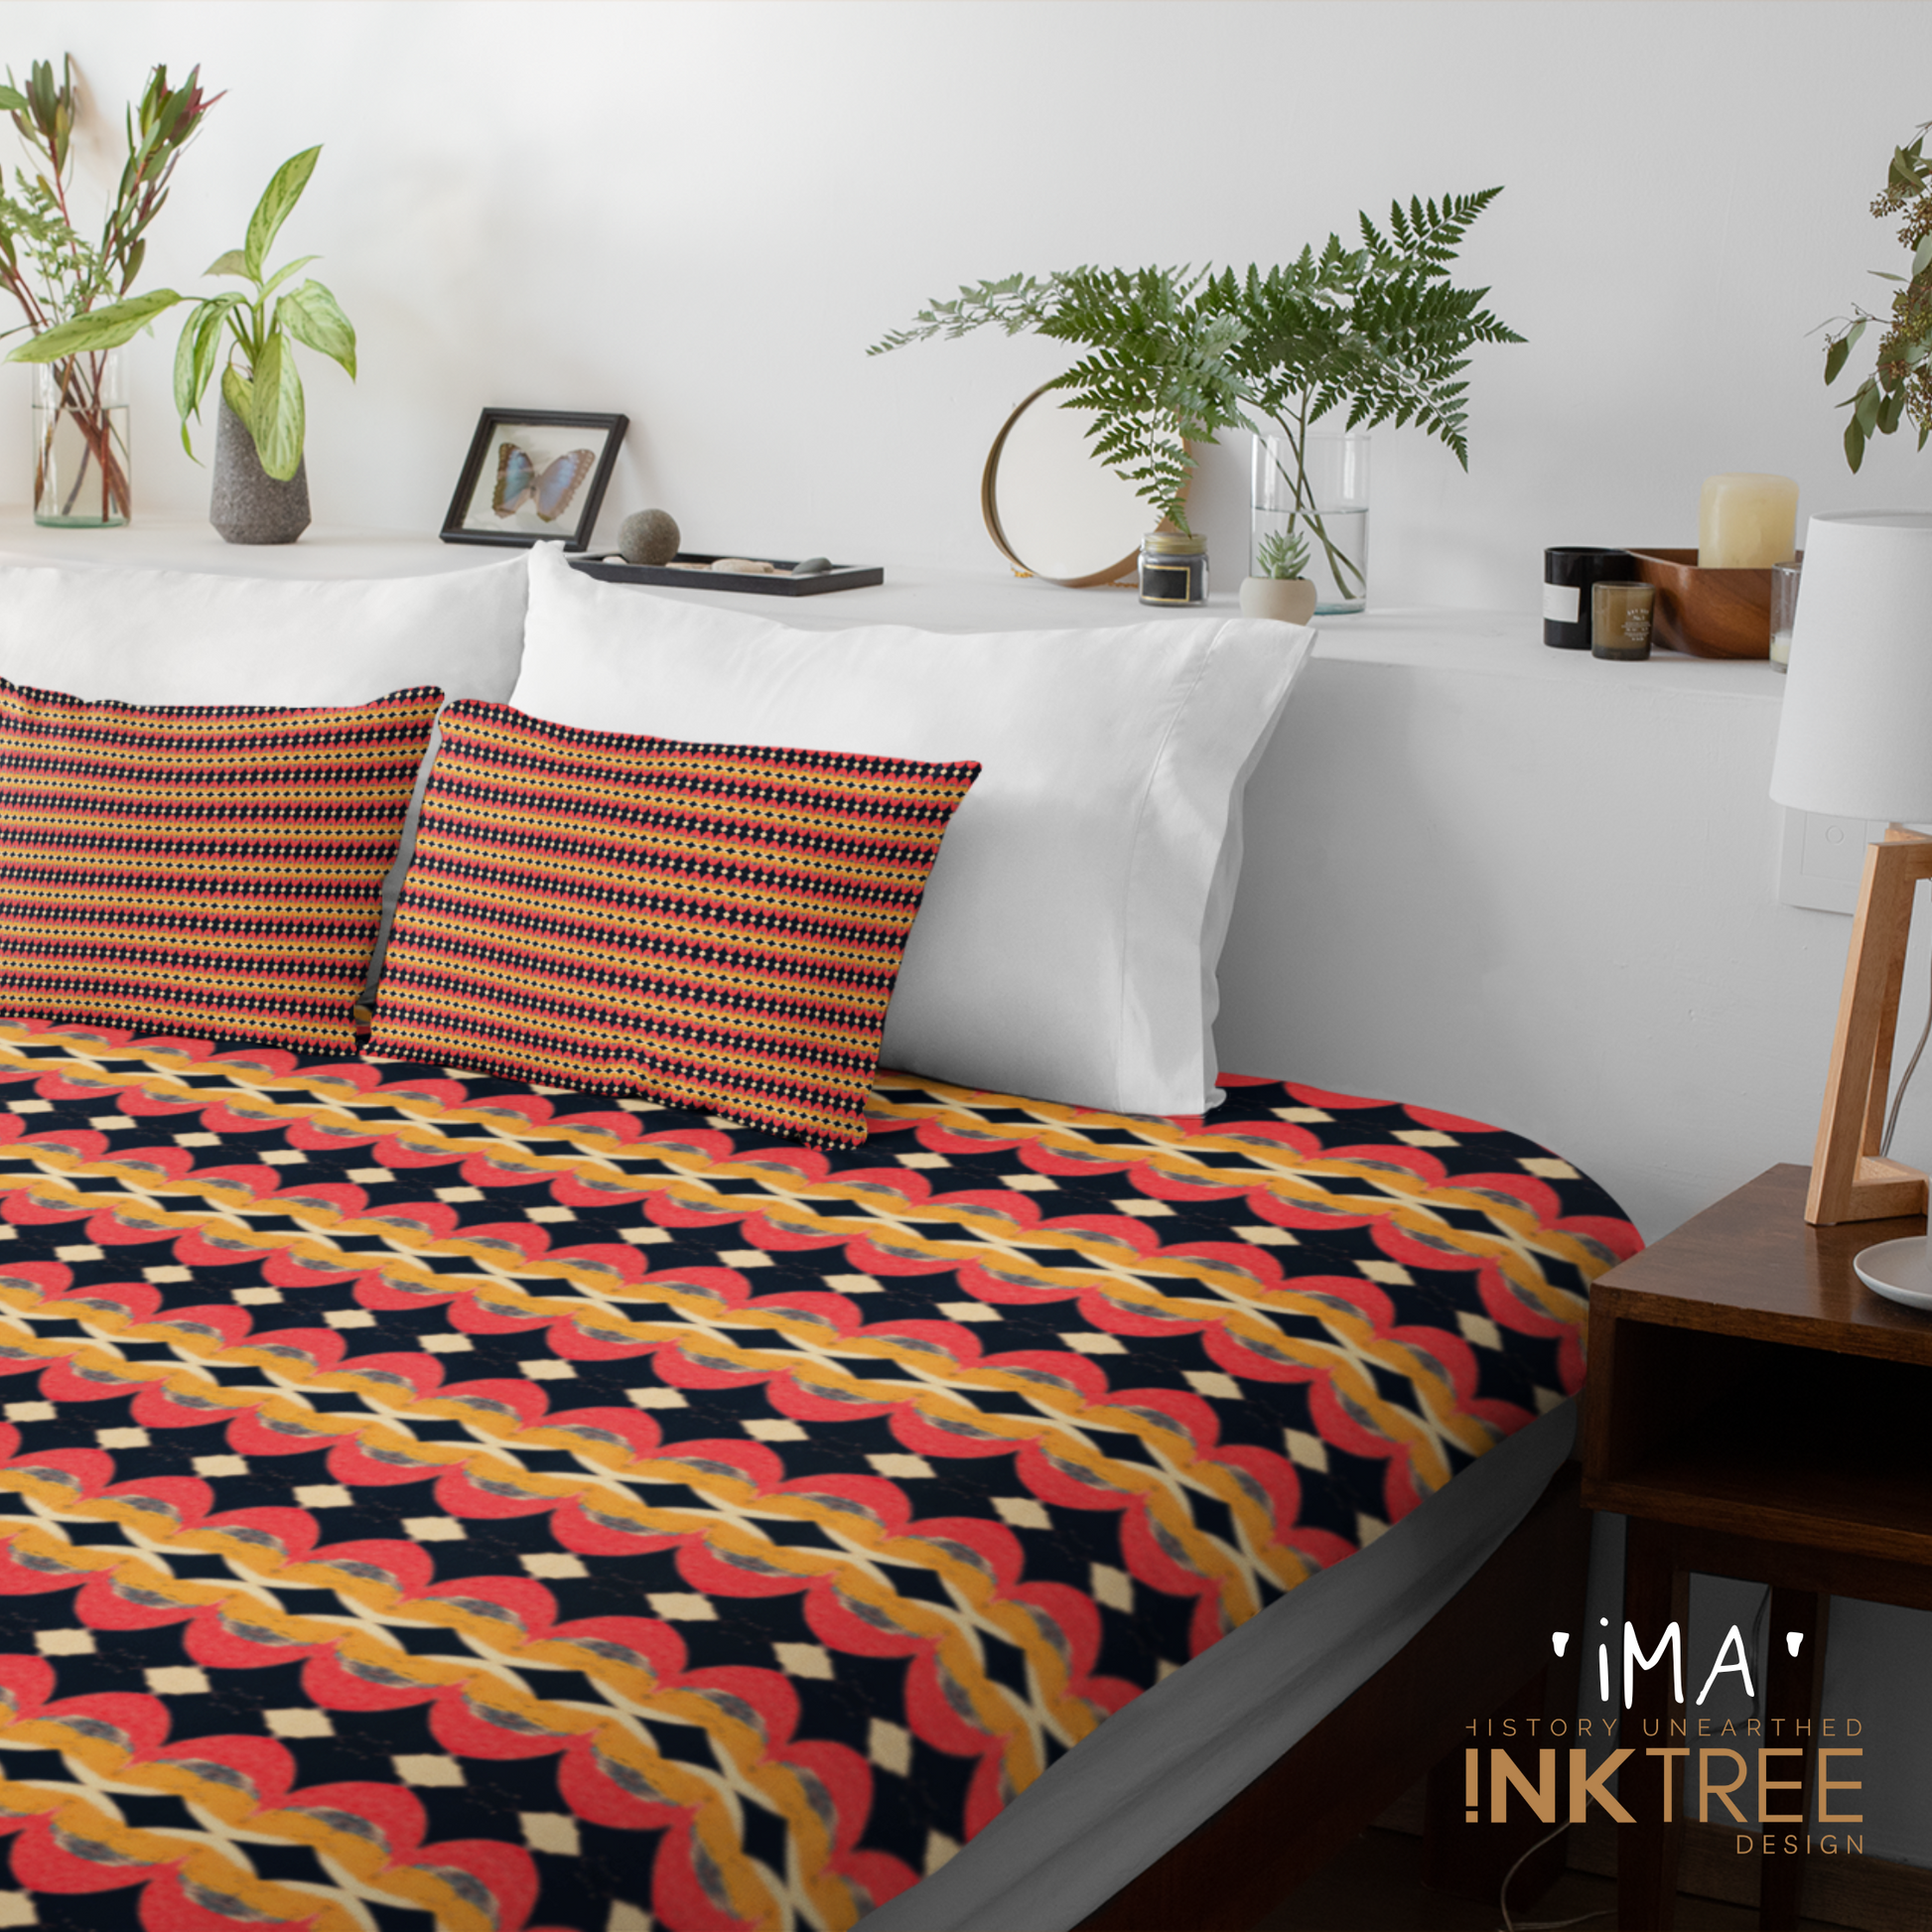 A doona cover and front pillows with an orange, black, white and yellow striped horizontal pattern on a bed with a white wall, white pillows and white backboard background. There is a lamp with a white shade and wood base and plants and a small round metal mirror on the back board. There is also a ima, history unearthed ink tree design logo in the bottom right hand corner on it.